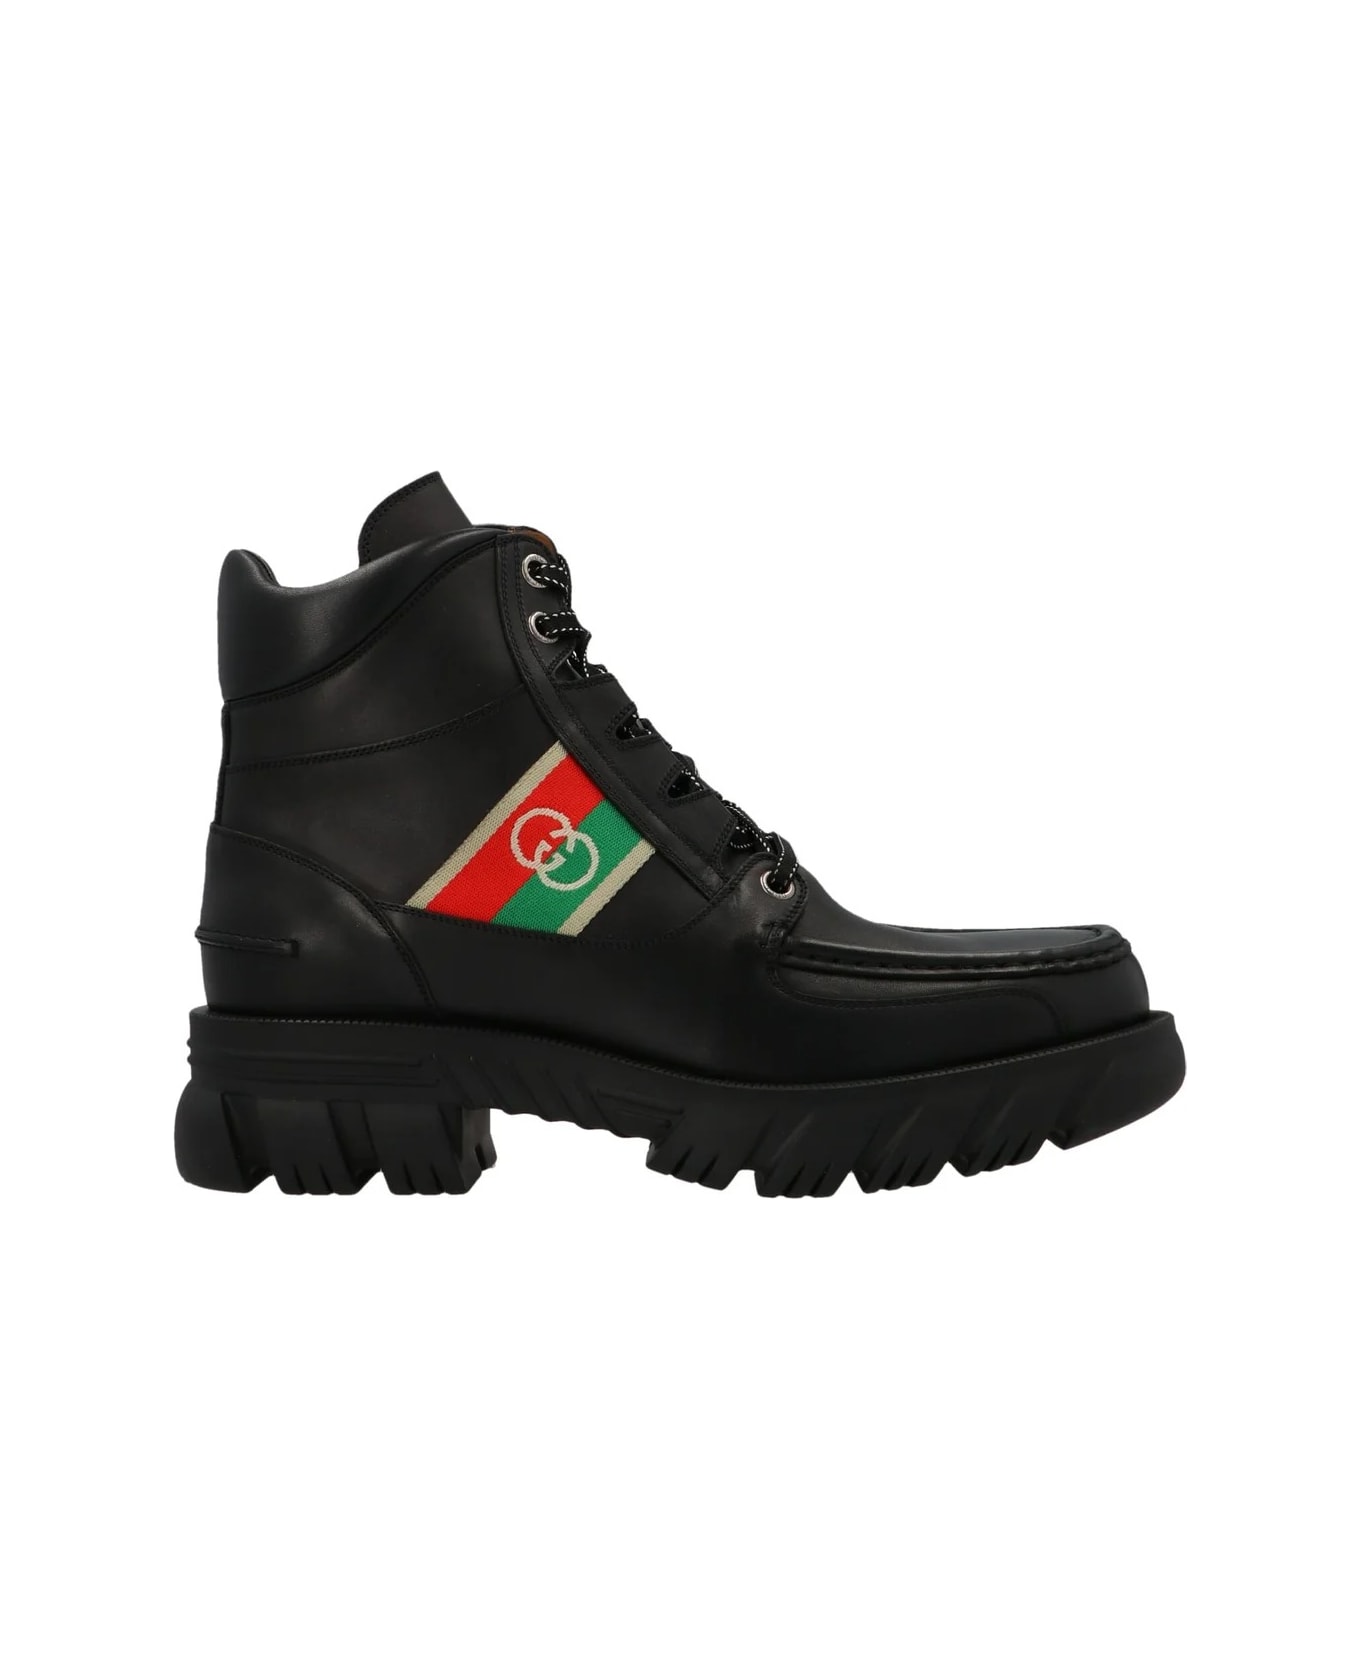 Gucci Ankle Boots With Interlocking G